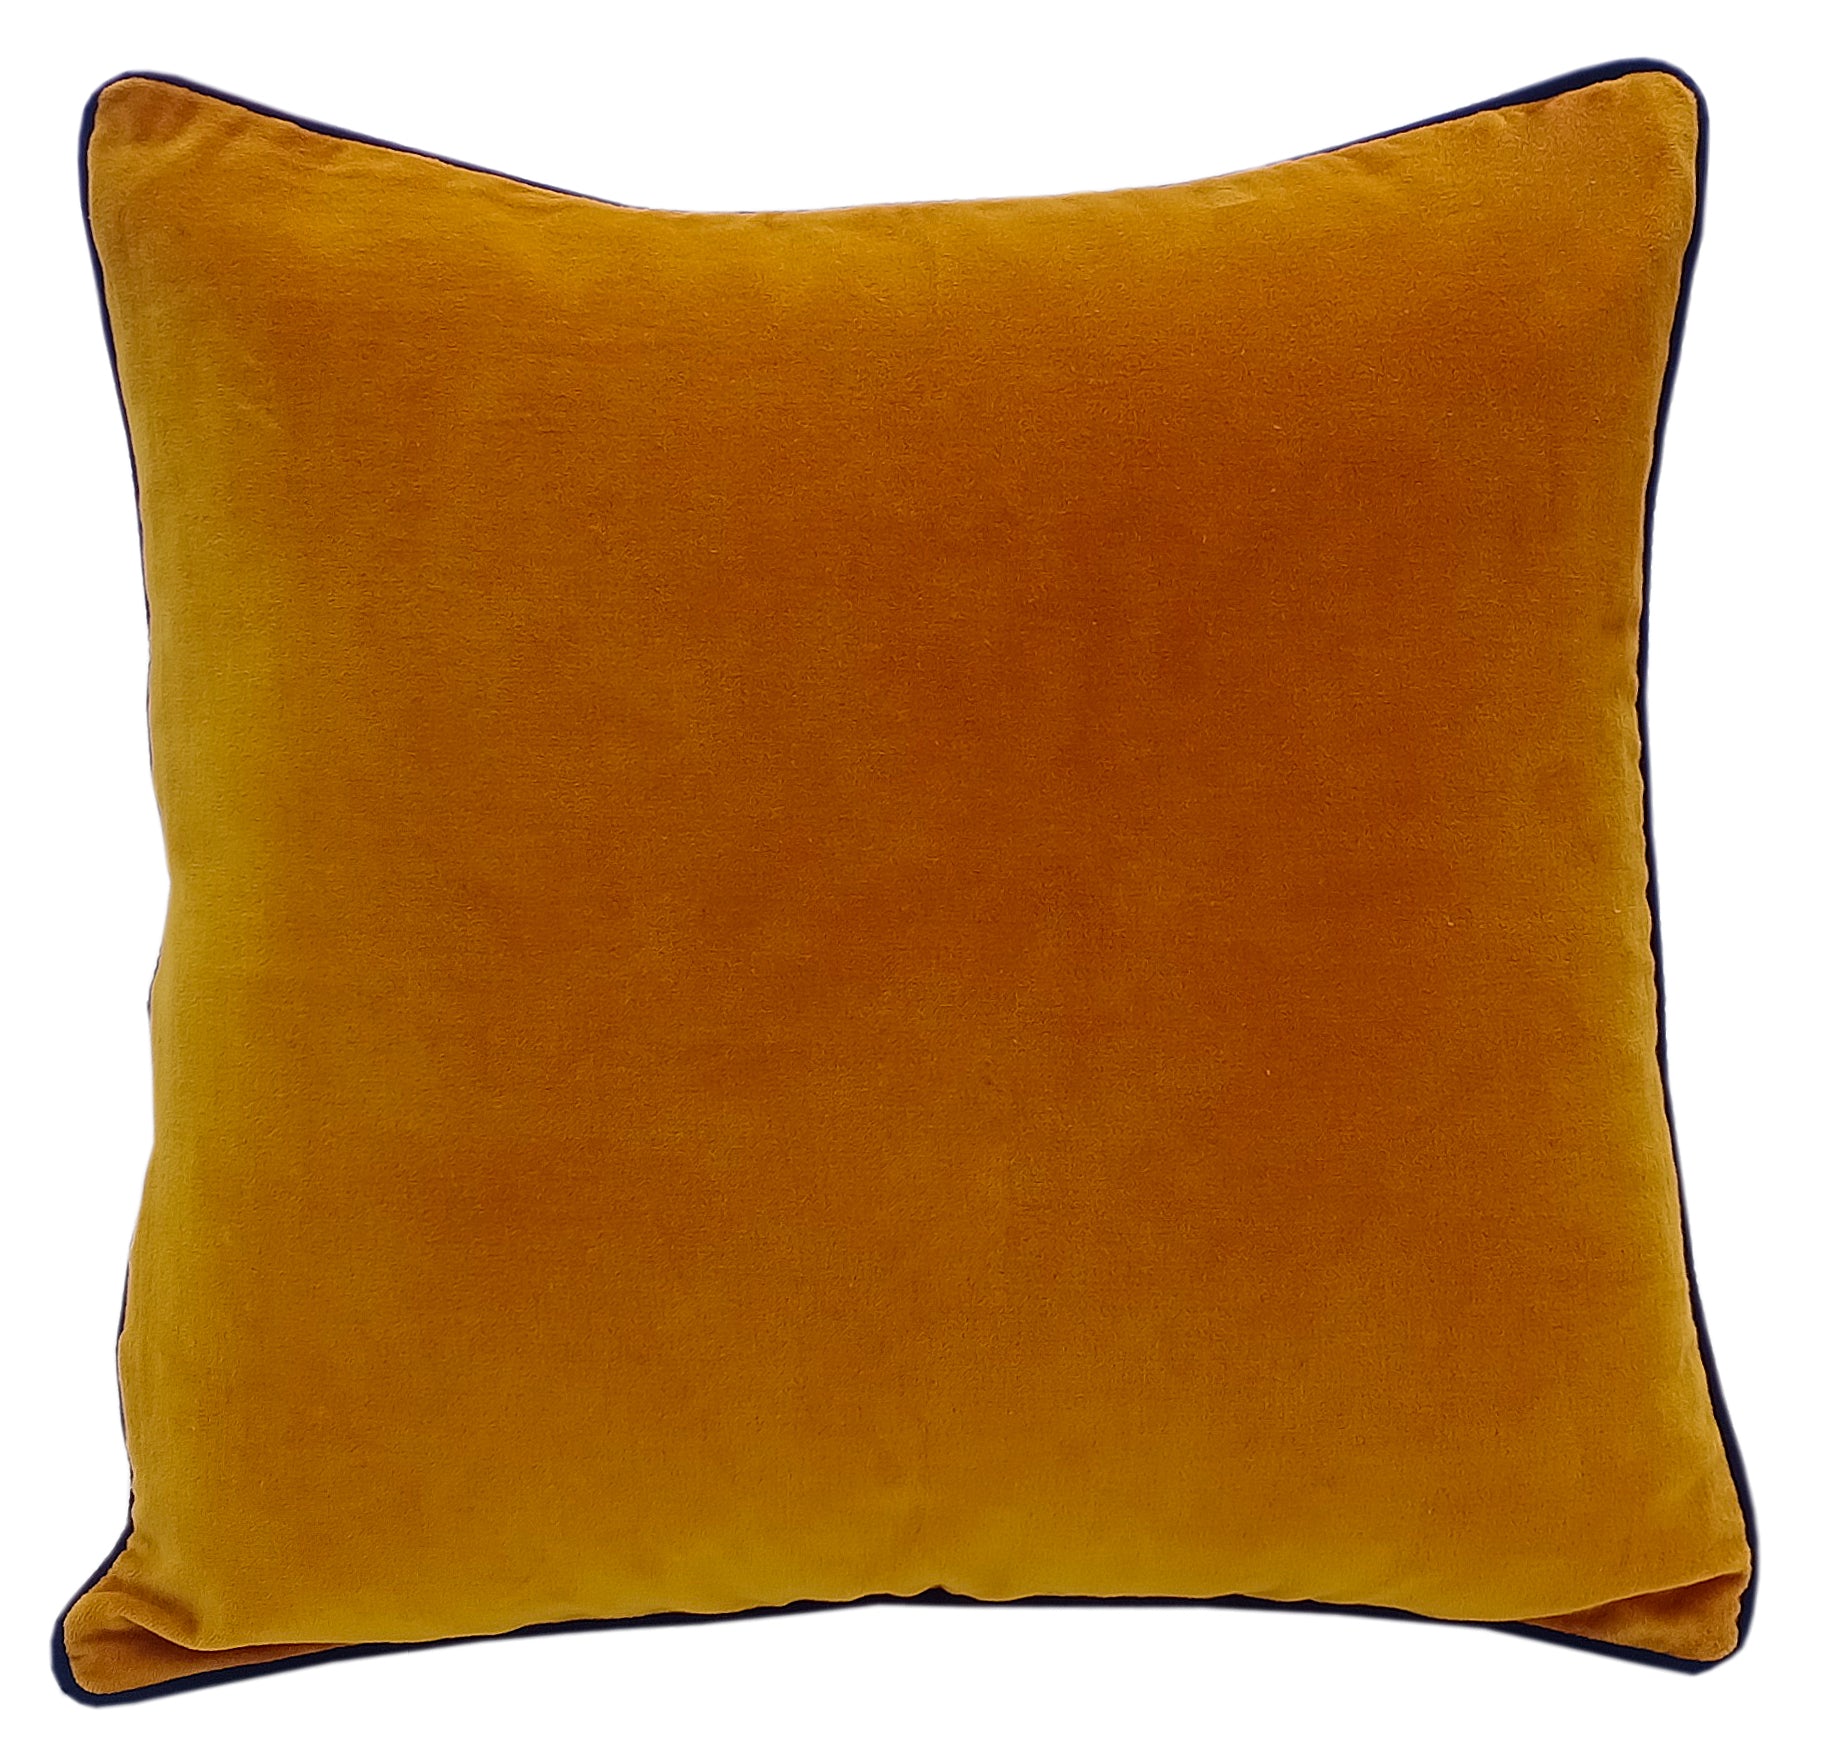 Mustard Velvet Cushion Cover with piping - The Teal Thread